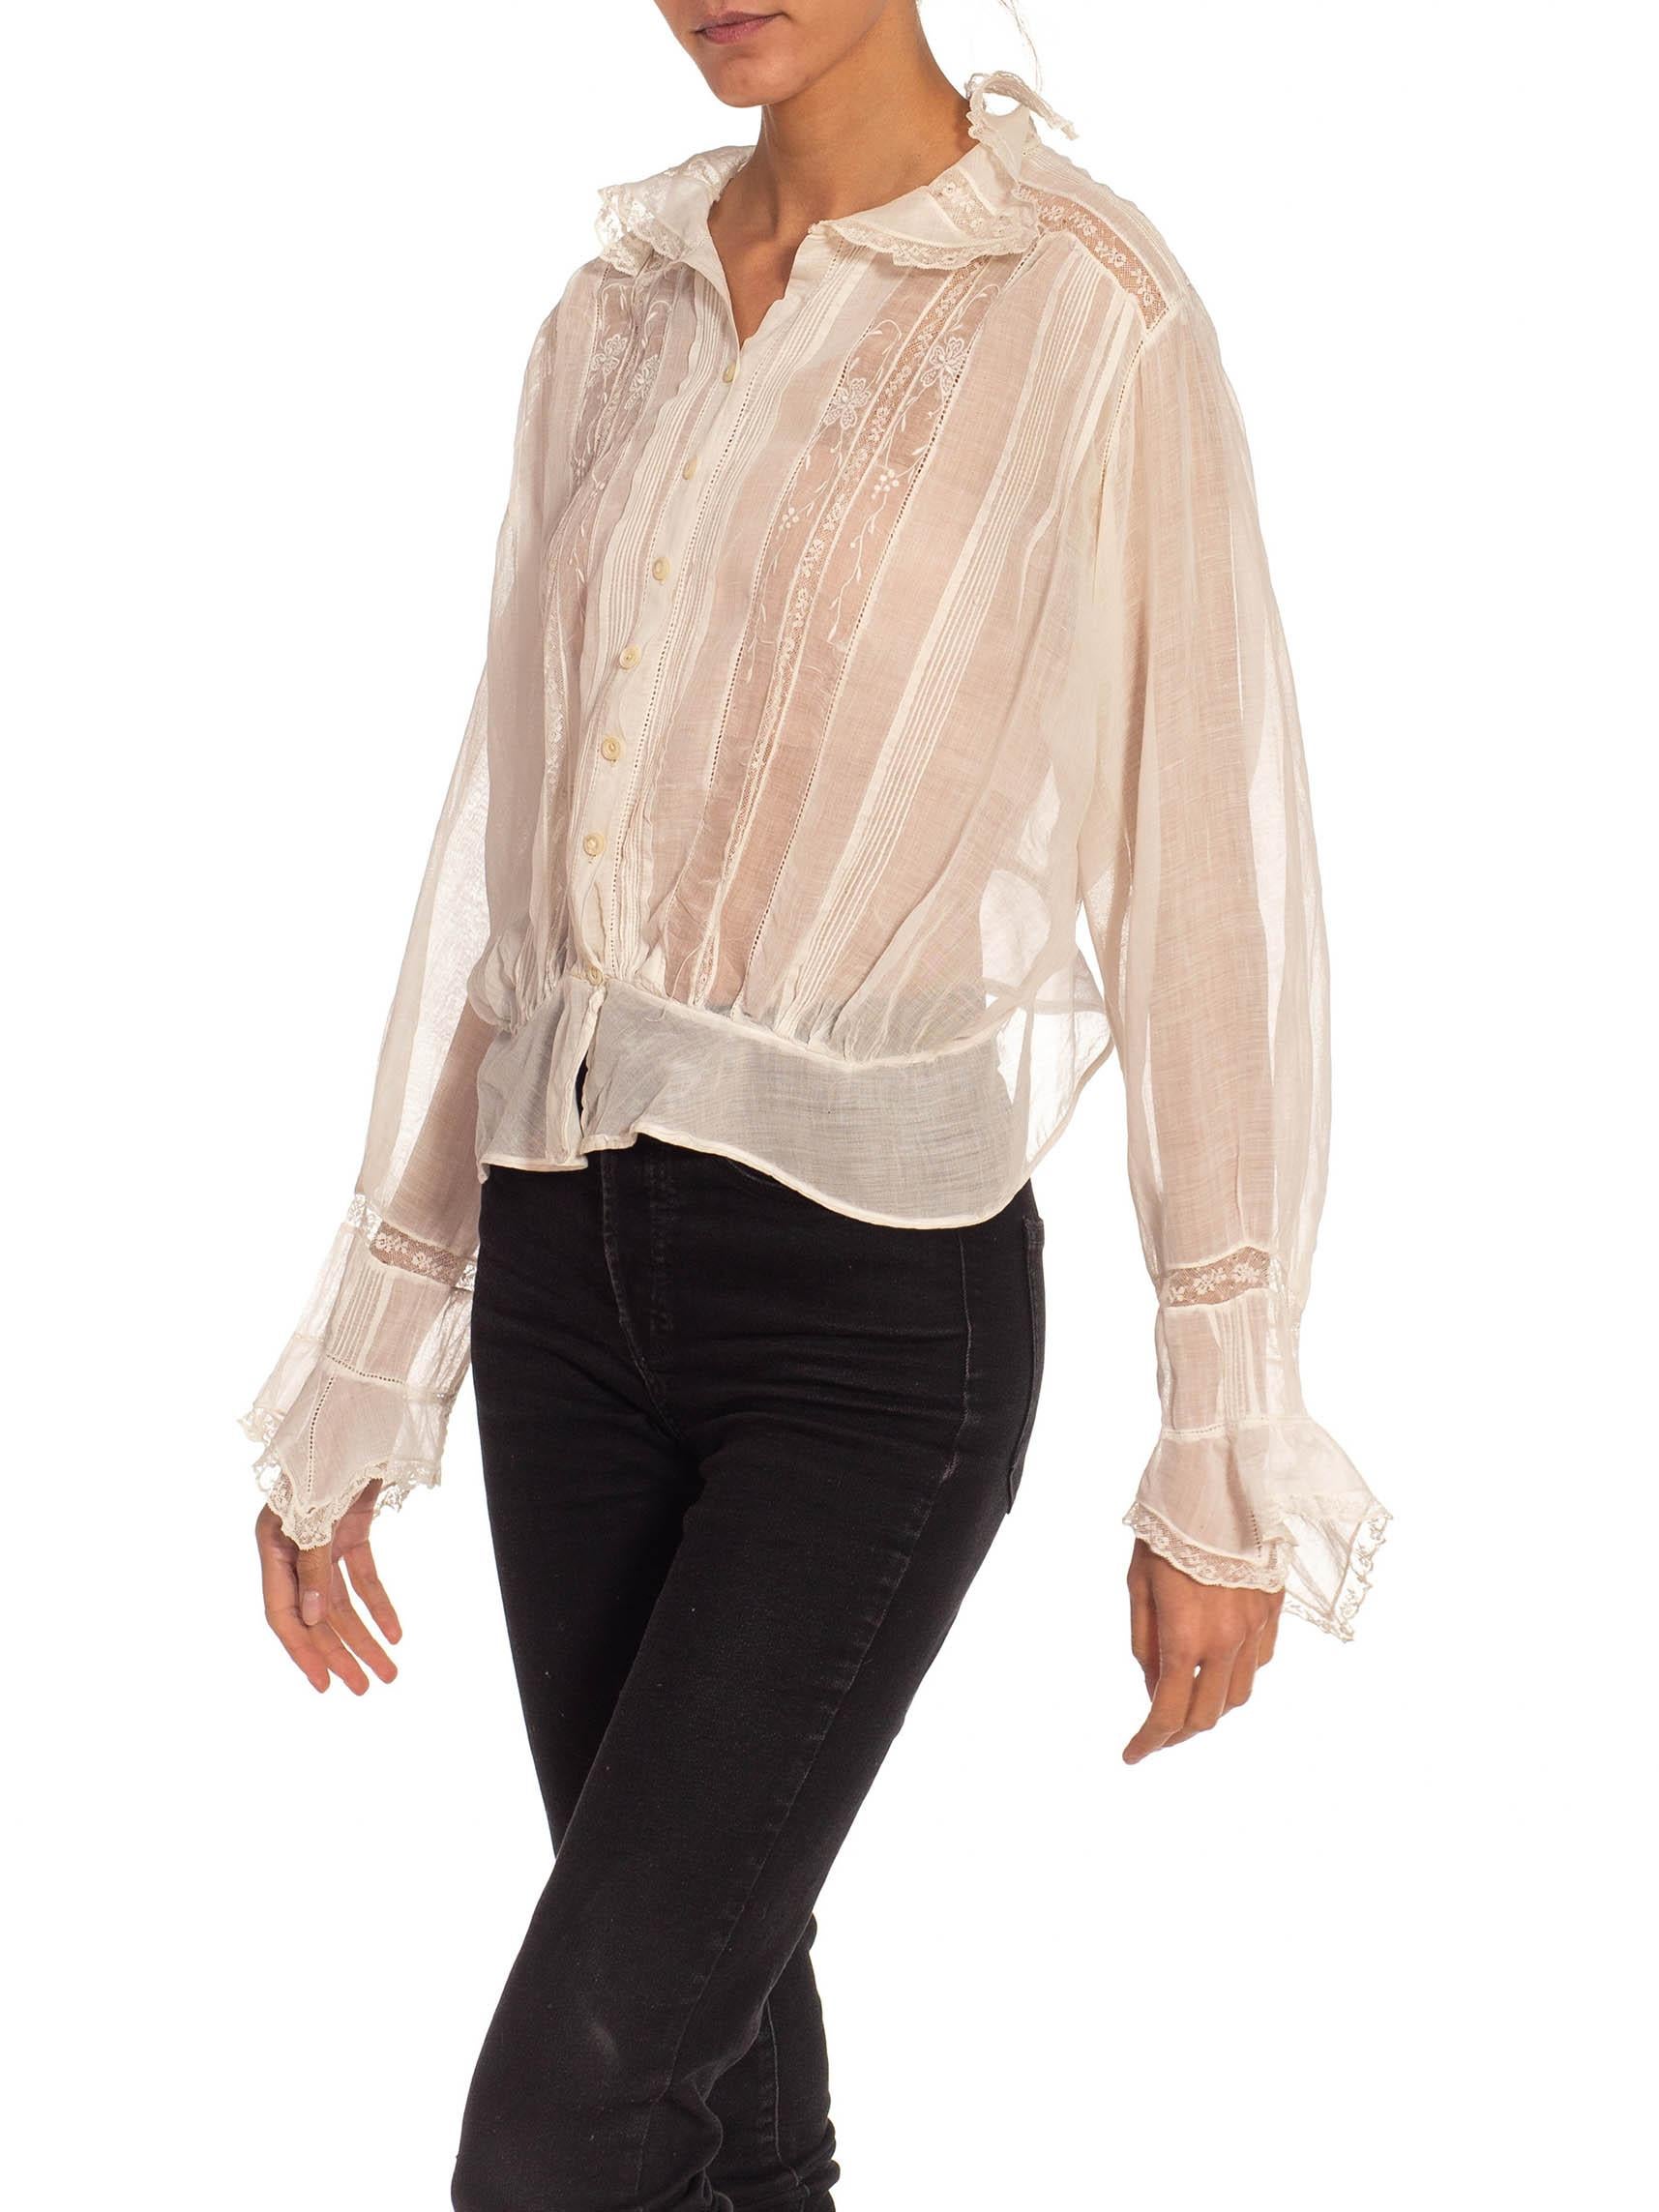 Victorian White Embroidered Cotton Button Up Shirt With Long Sleeves For Sale 4